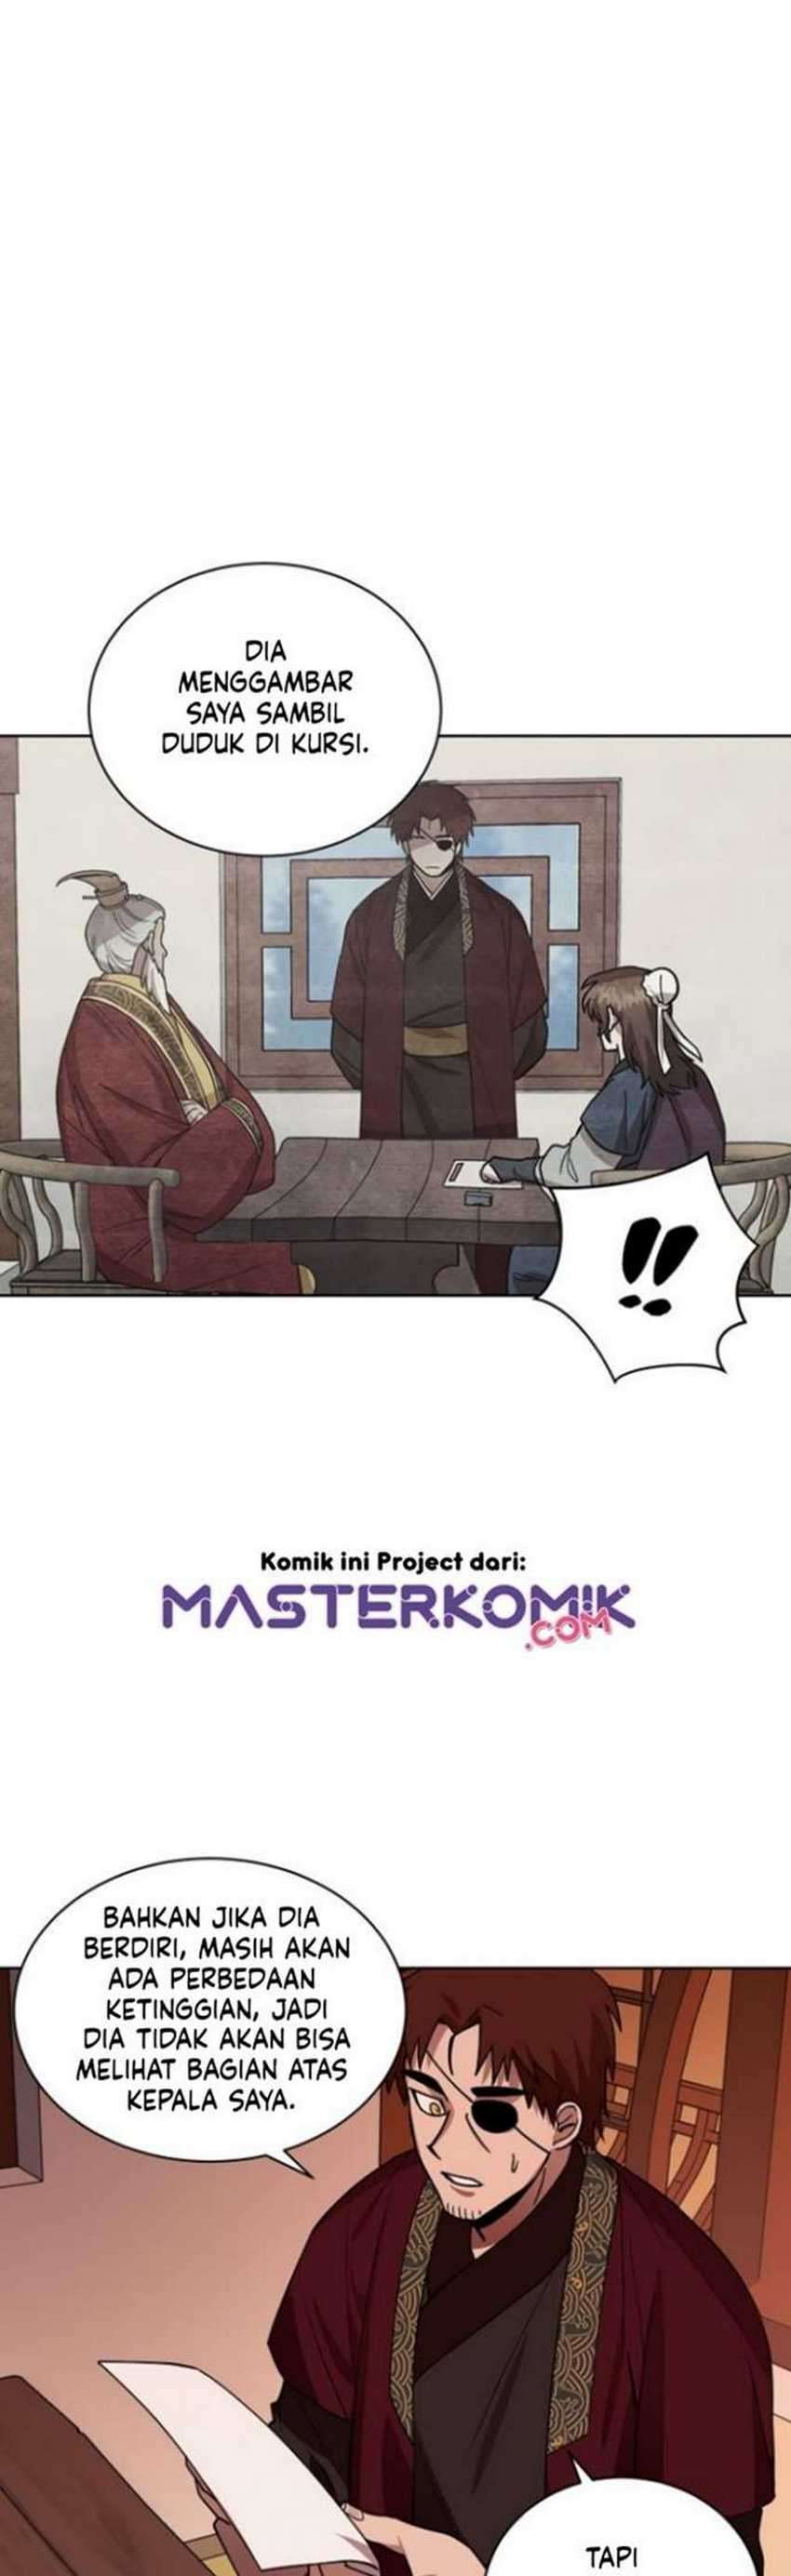 Fire King Dragon Chapter 12